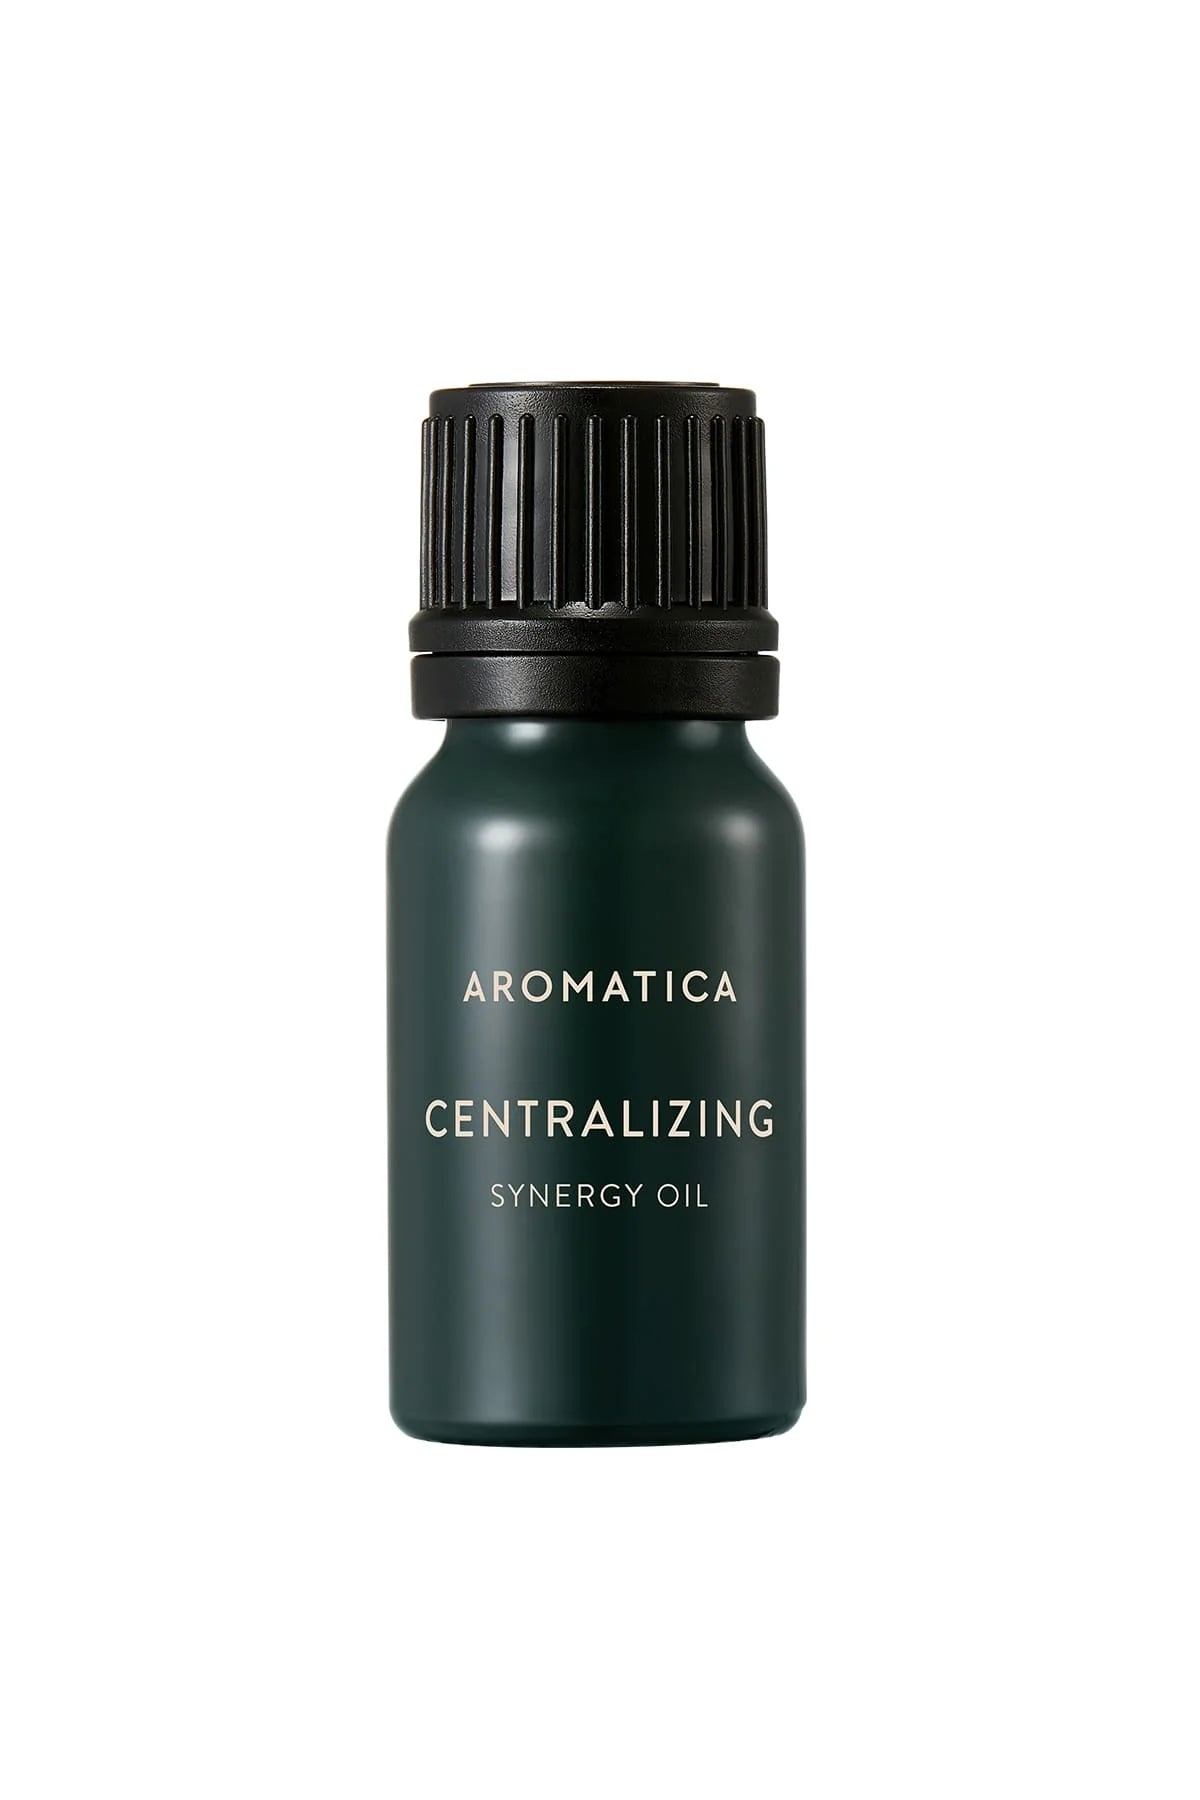 Aromatica Centralizing Synergy Oil